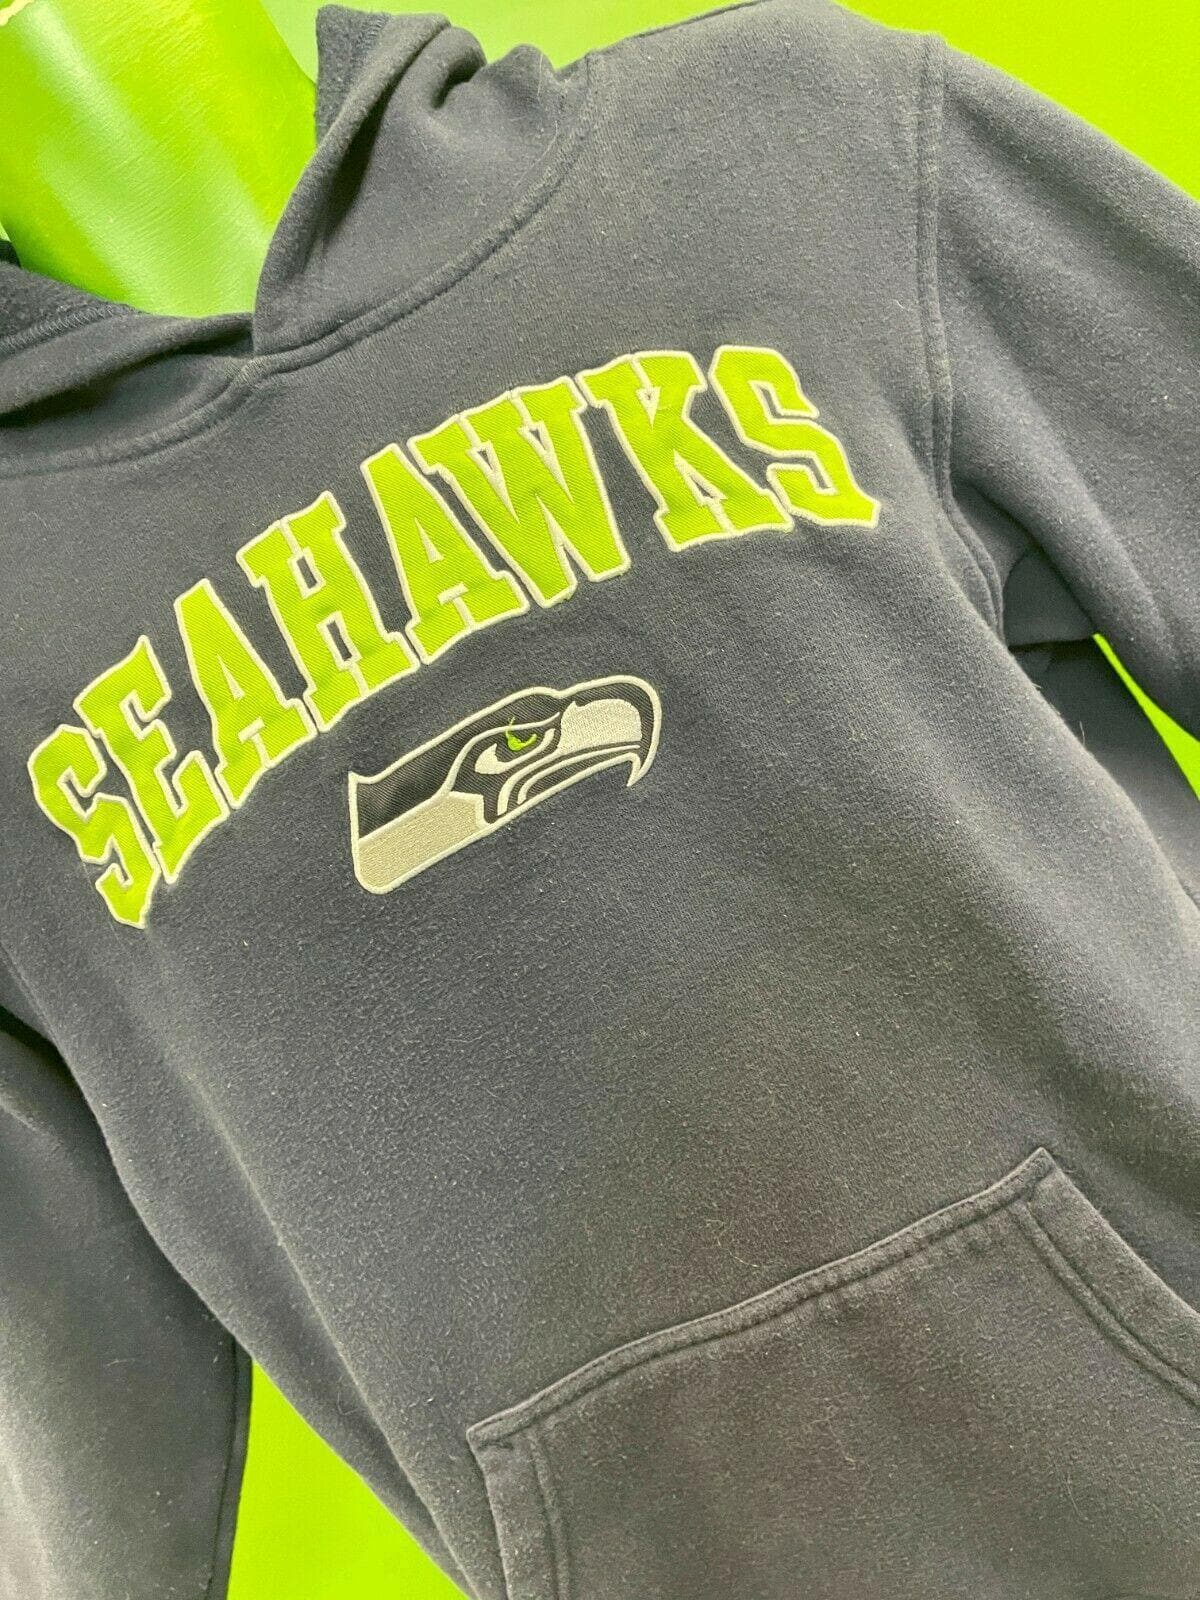 NFL Seattle Seahawks Pullover Hoodie Stitched Youth Large 14-16